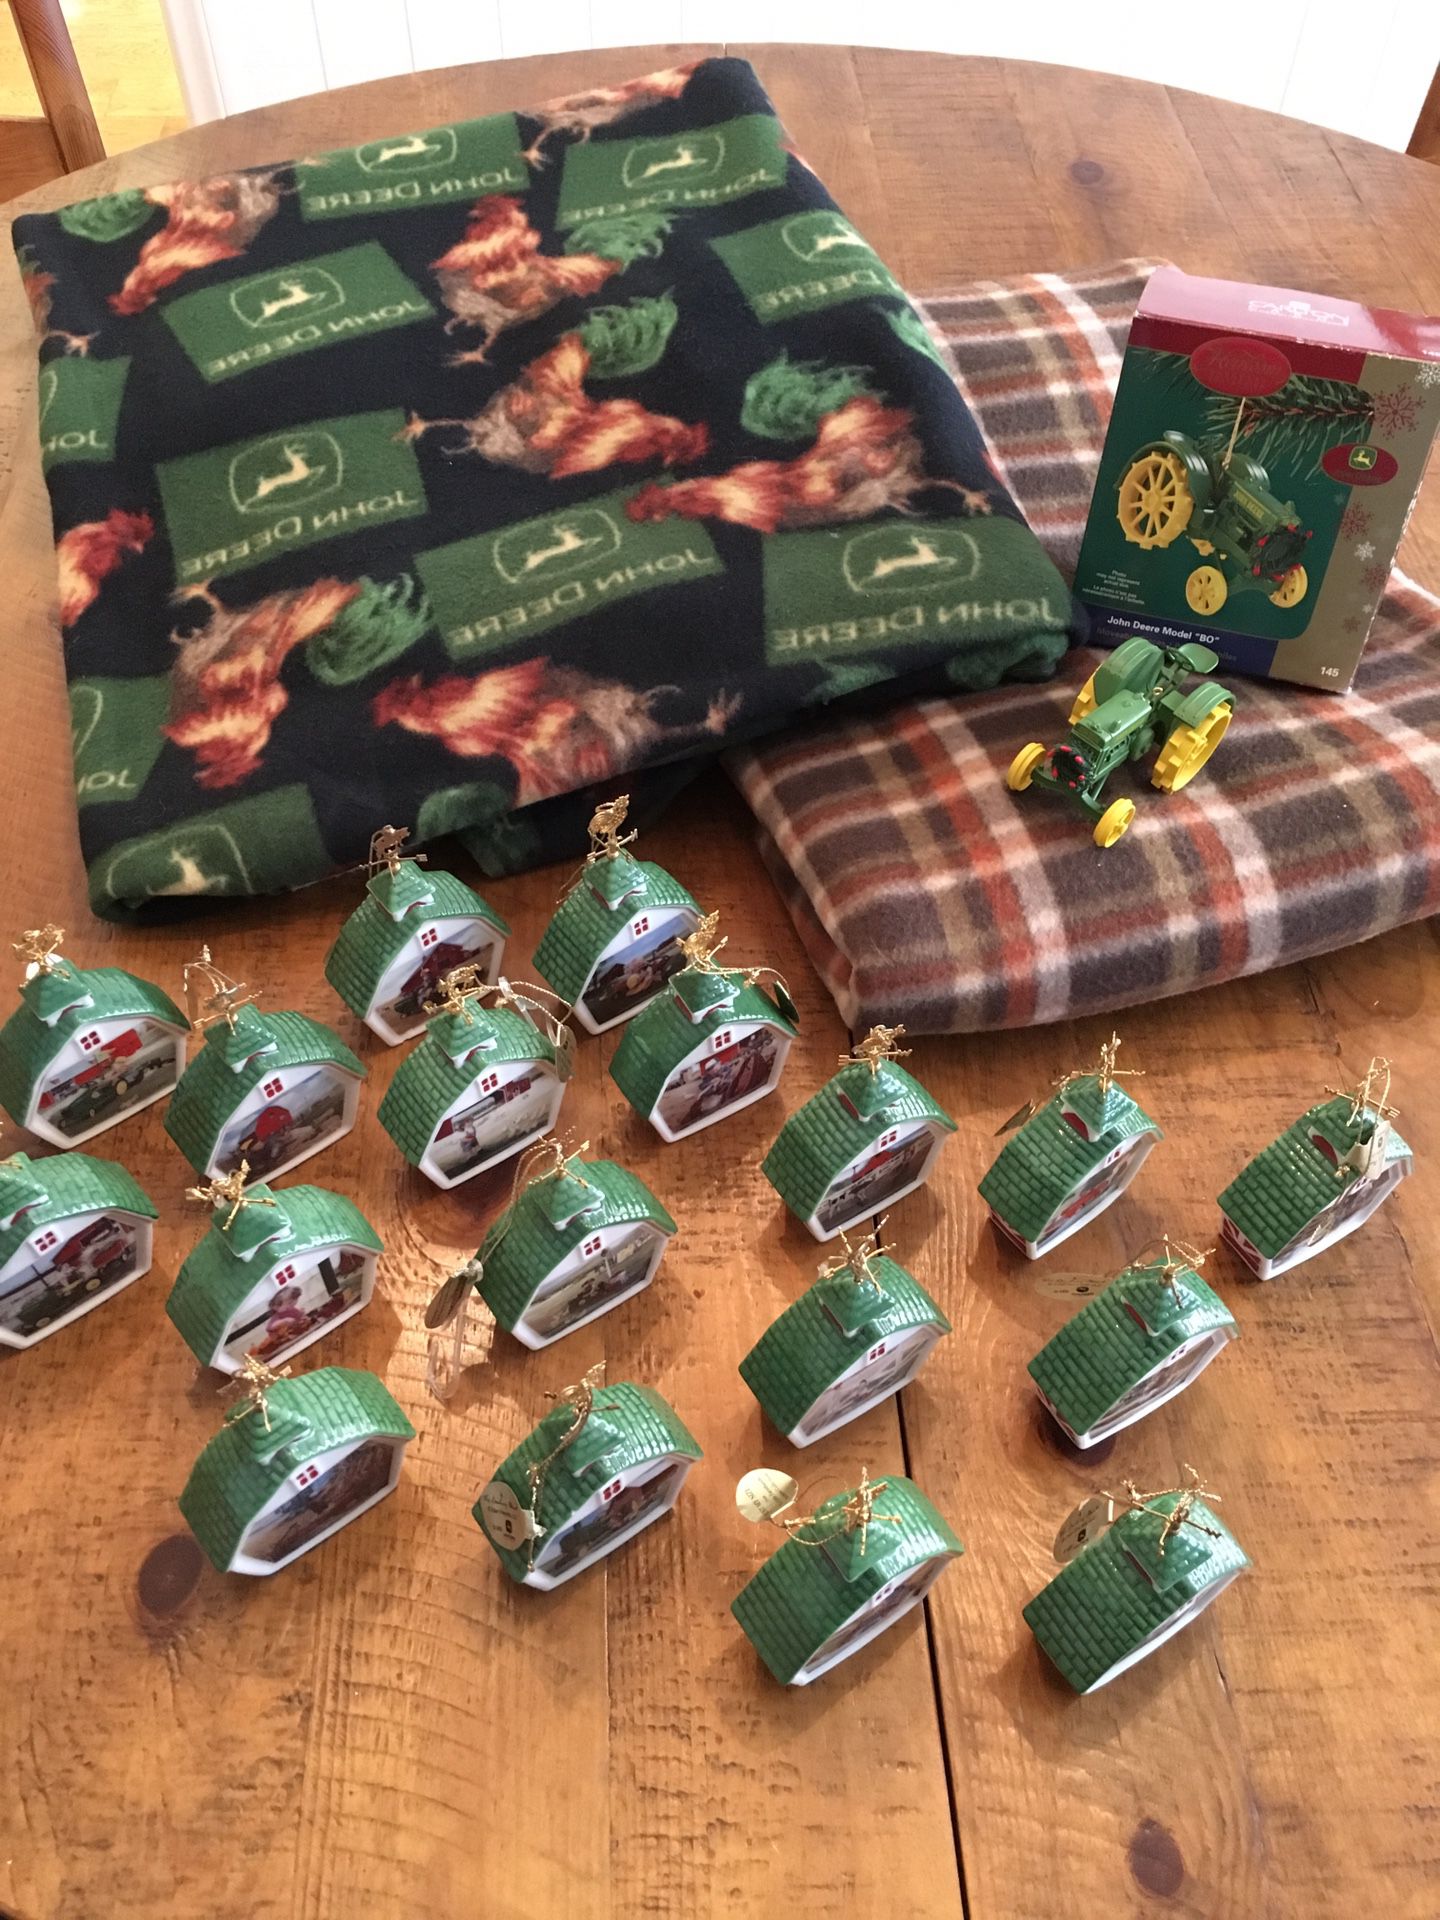 John Deere Farmhouse Christmas Ornaments and Large Size Blanket Material Lot $15